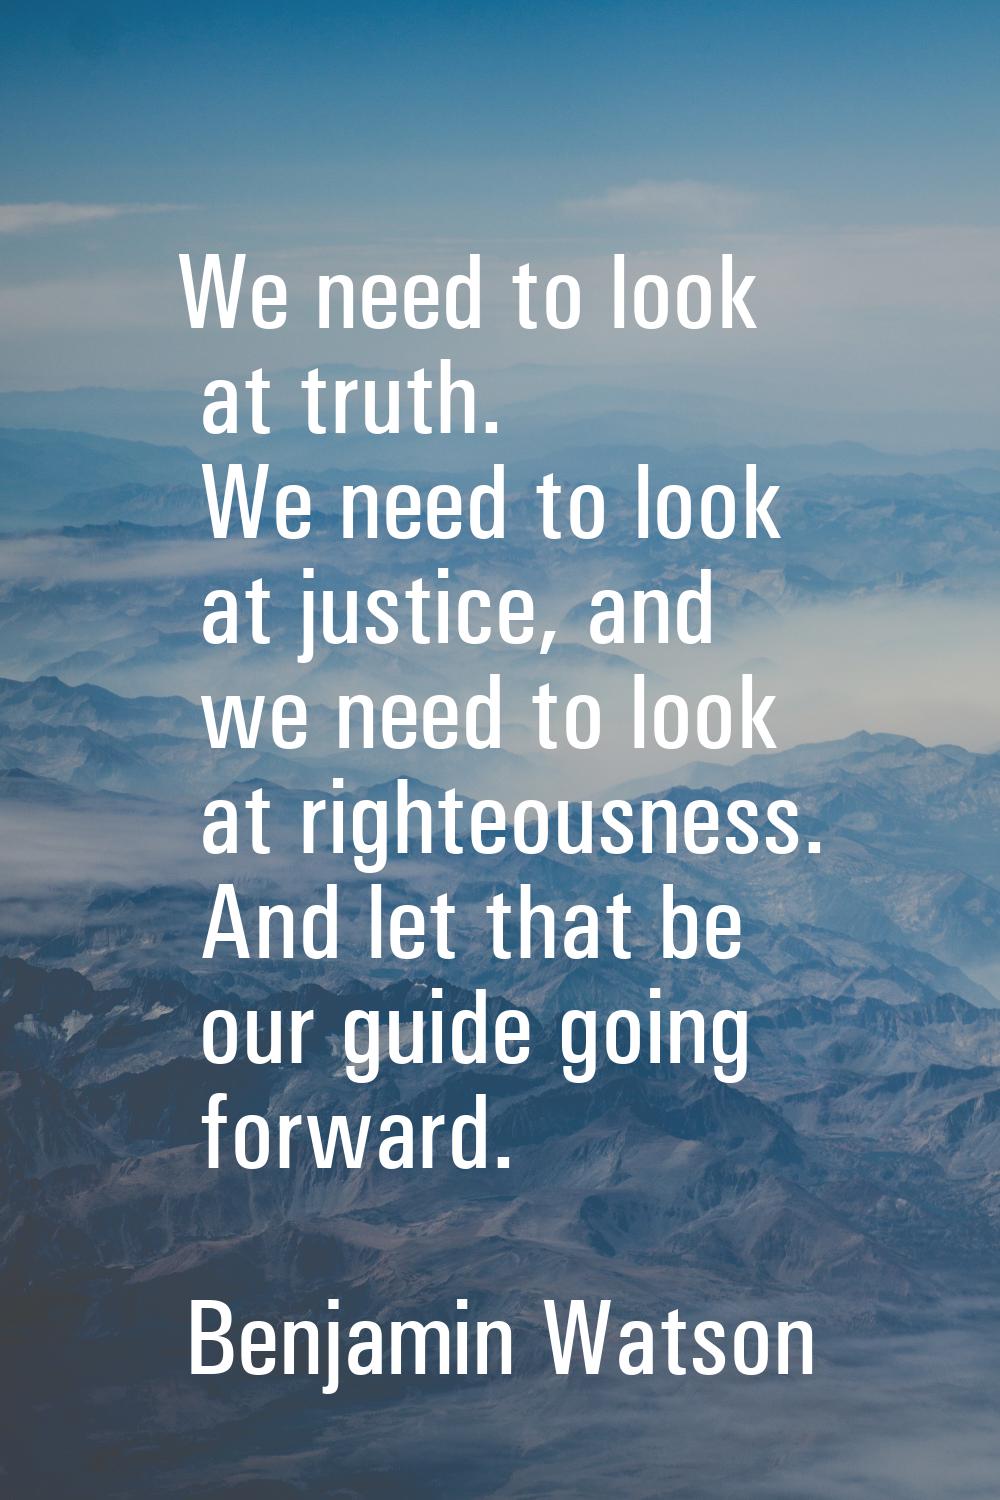 We need to look at truth. We need to look at justice, and we need to look at righteousness. And let